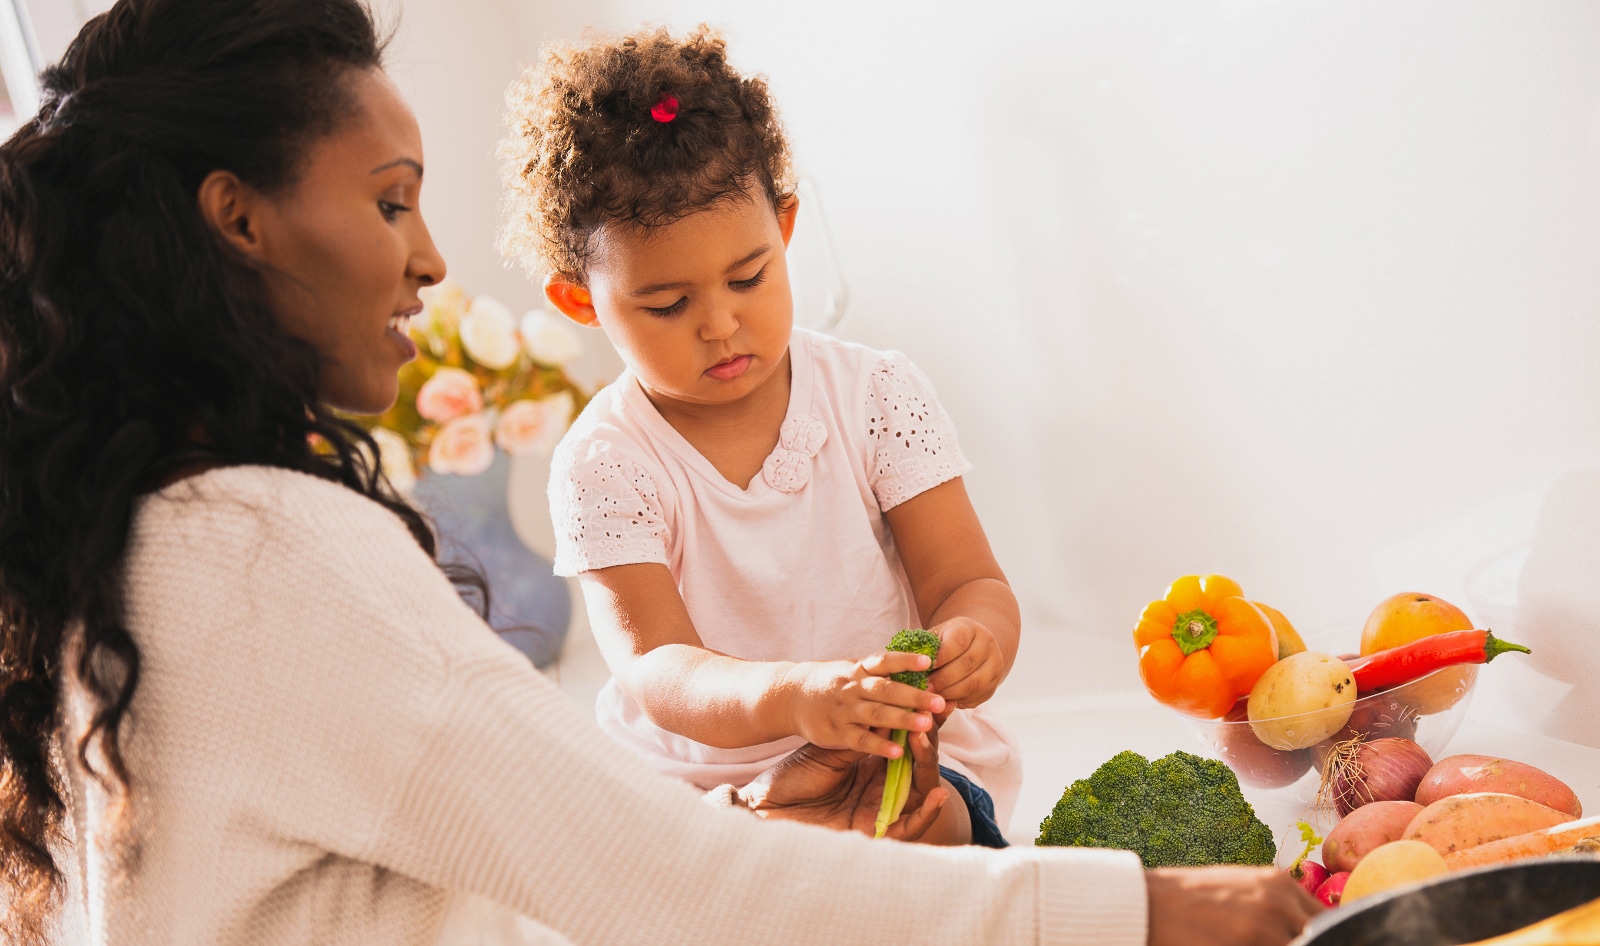 Vegetarian Children Are Just as Healthy as Kids Who Eat Meat, New Study Finds